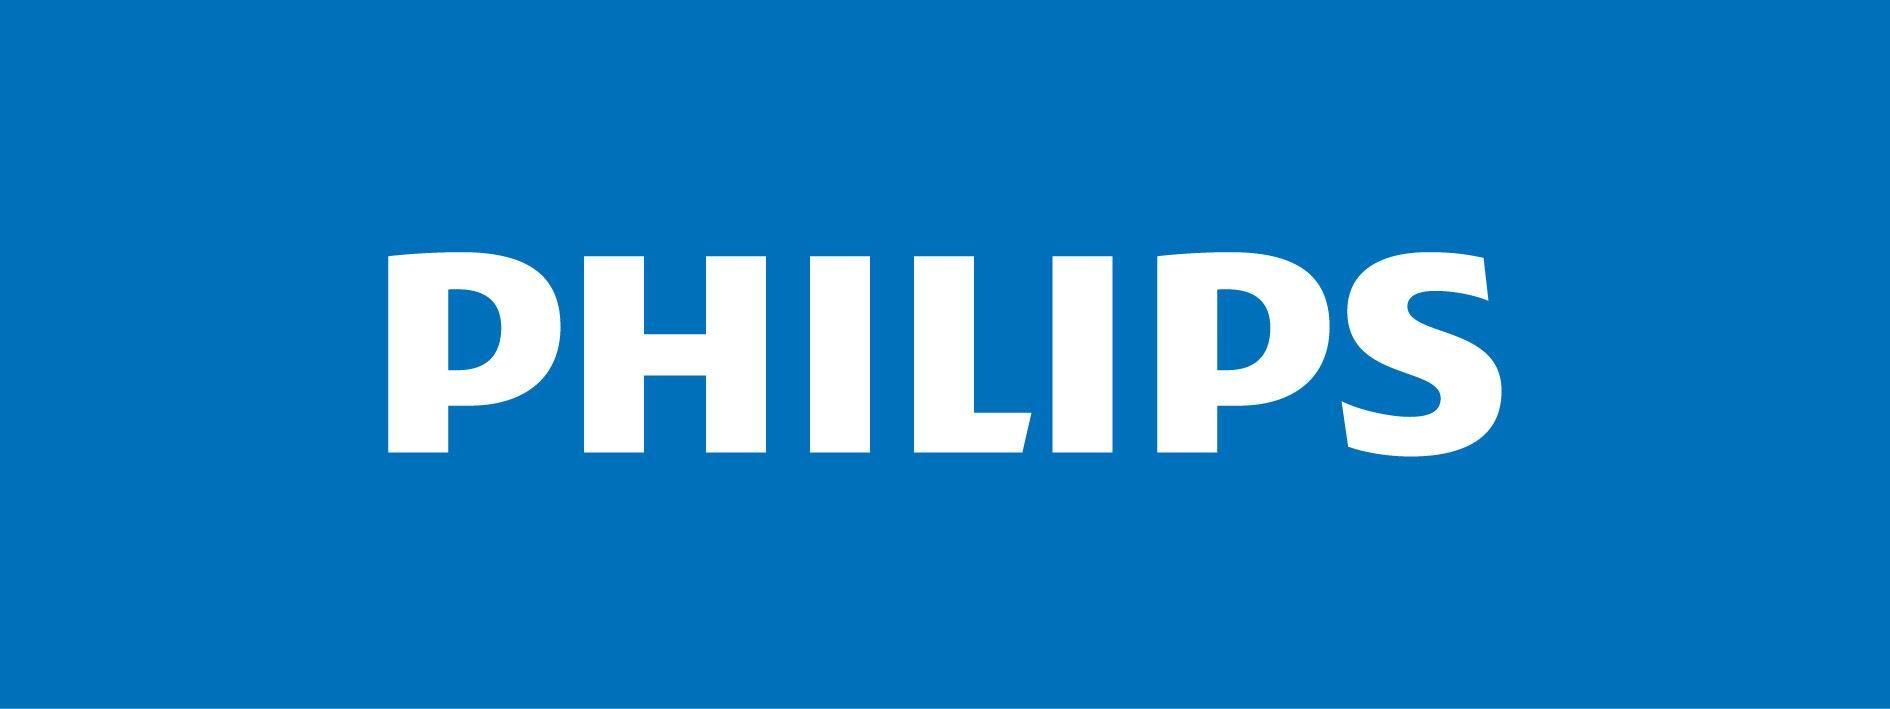 New Philips Logo - Philips announces a new UHD television powered by Android 4.2.2 ...